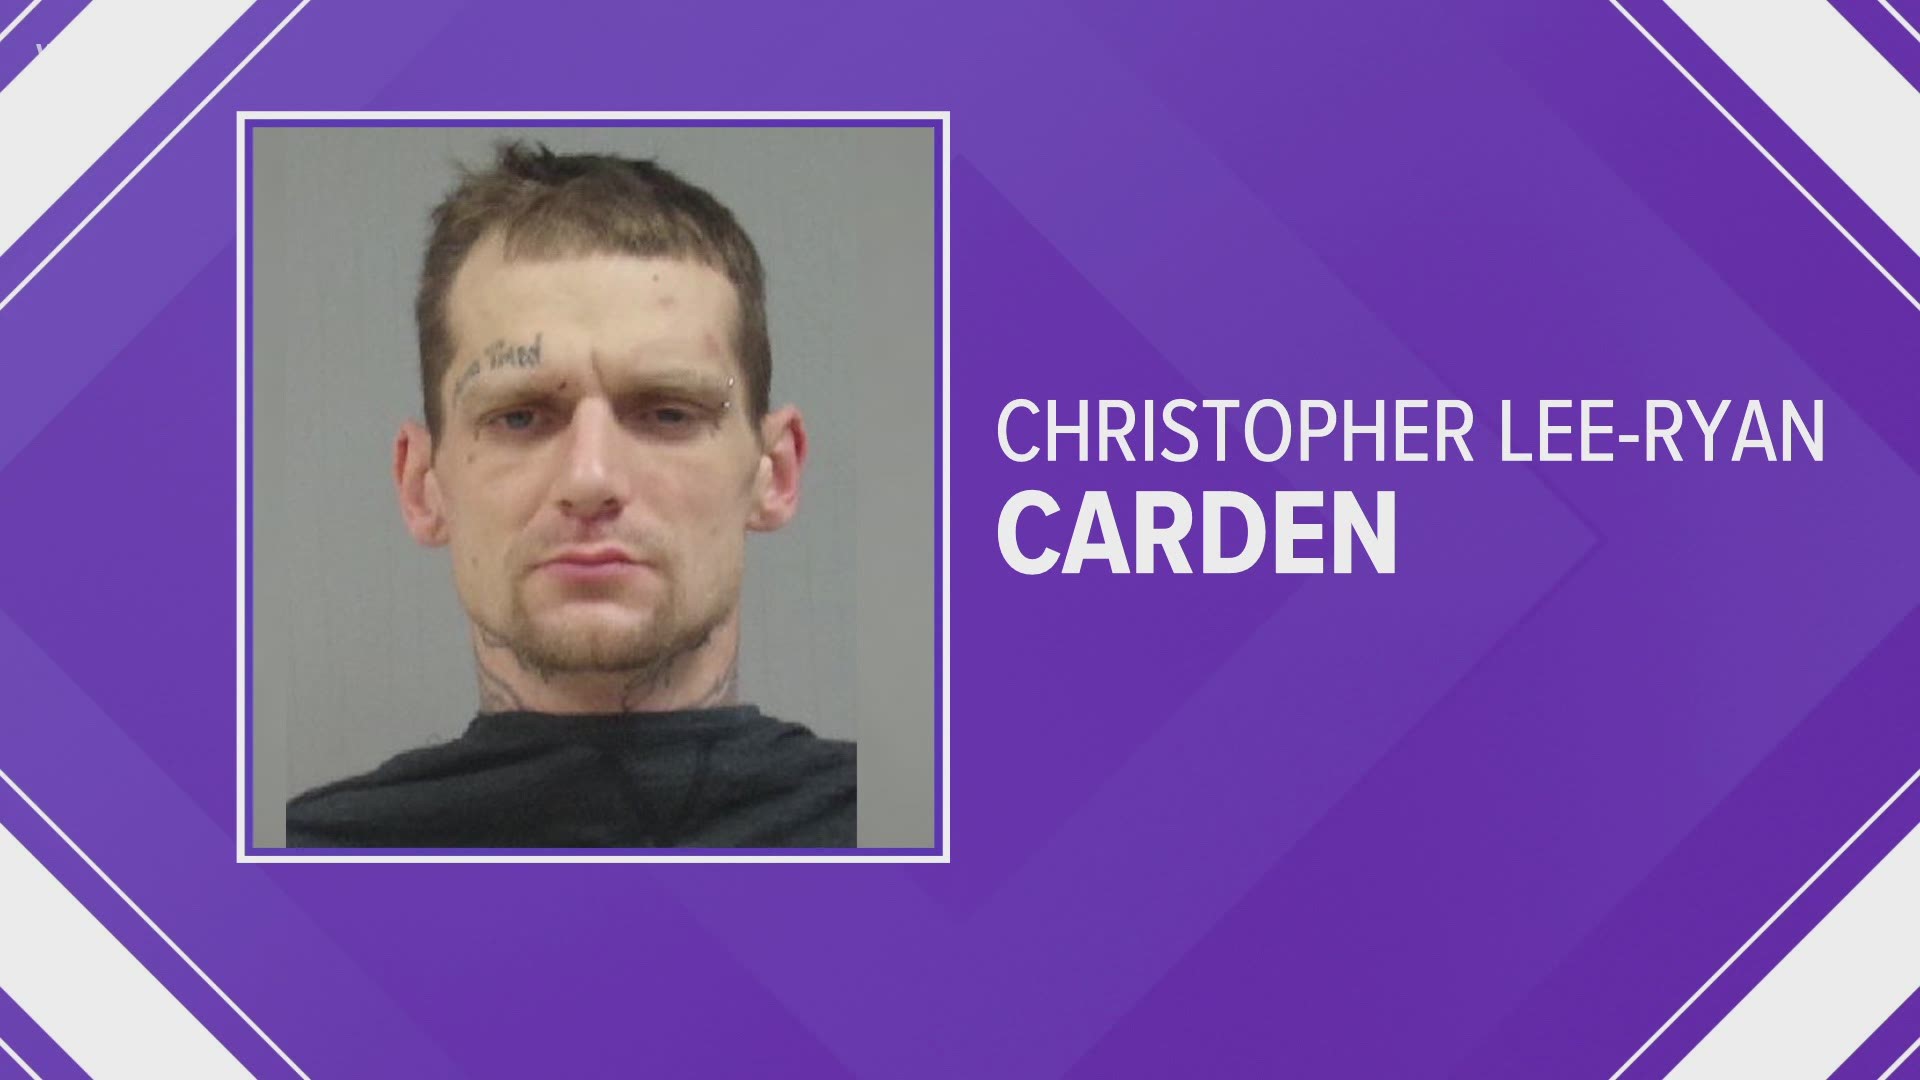 Christopher Lee-Ryan Carden is accused of killing two men on Jan. 15, before allegedly stealing a car to flee from police.